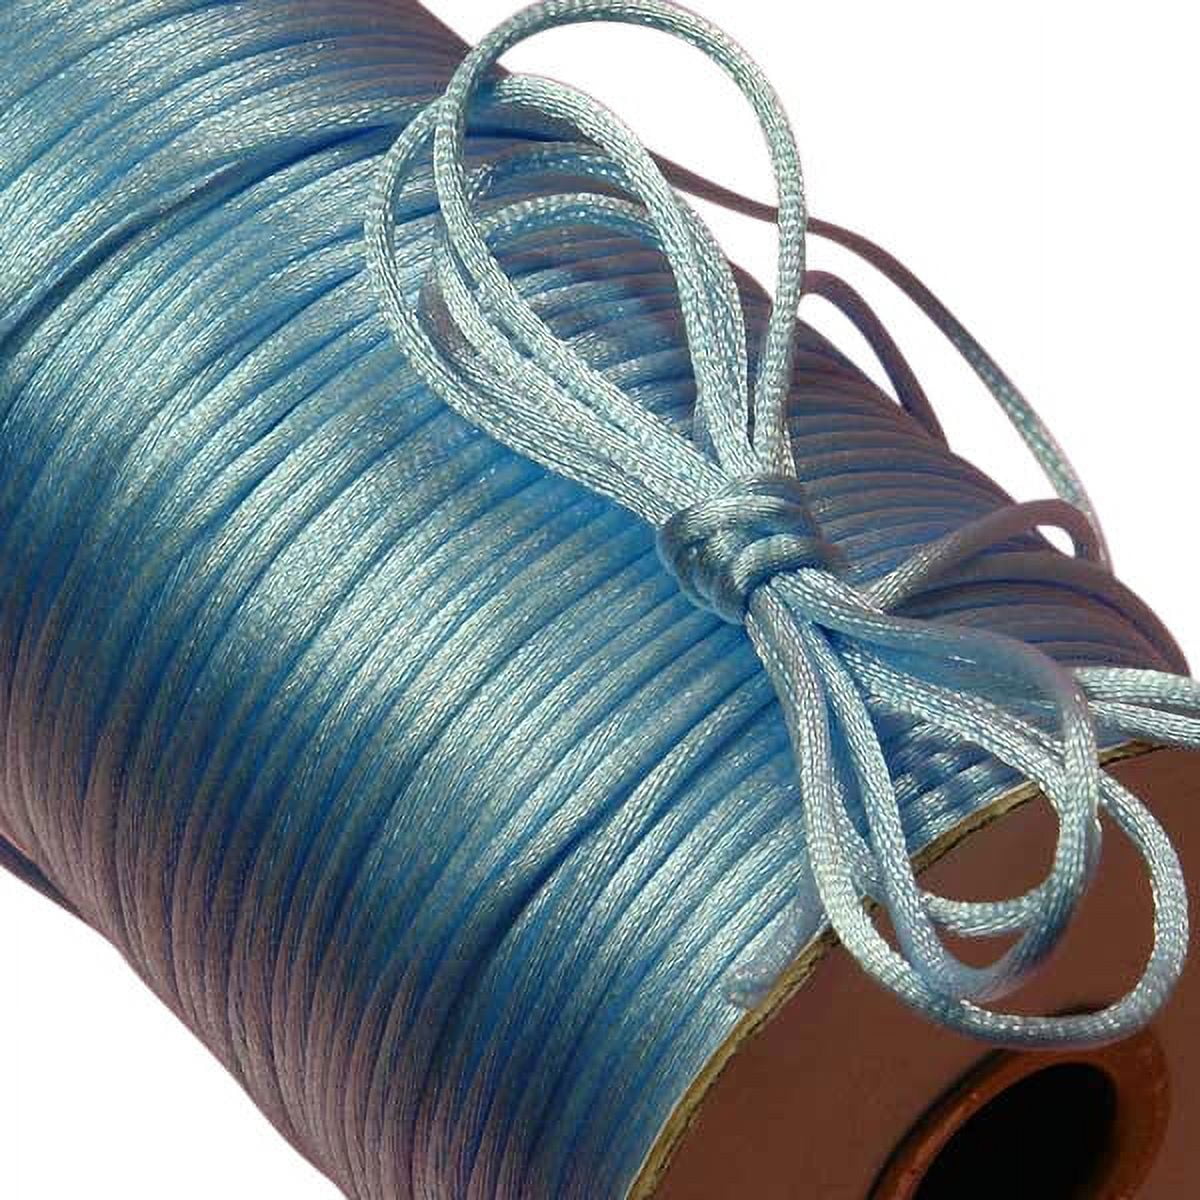 Rattail Satin Cord - 3 Yards of Each Color